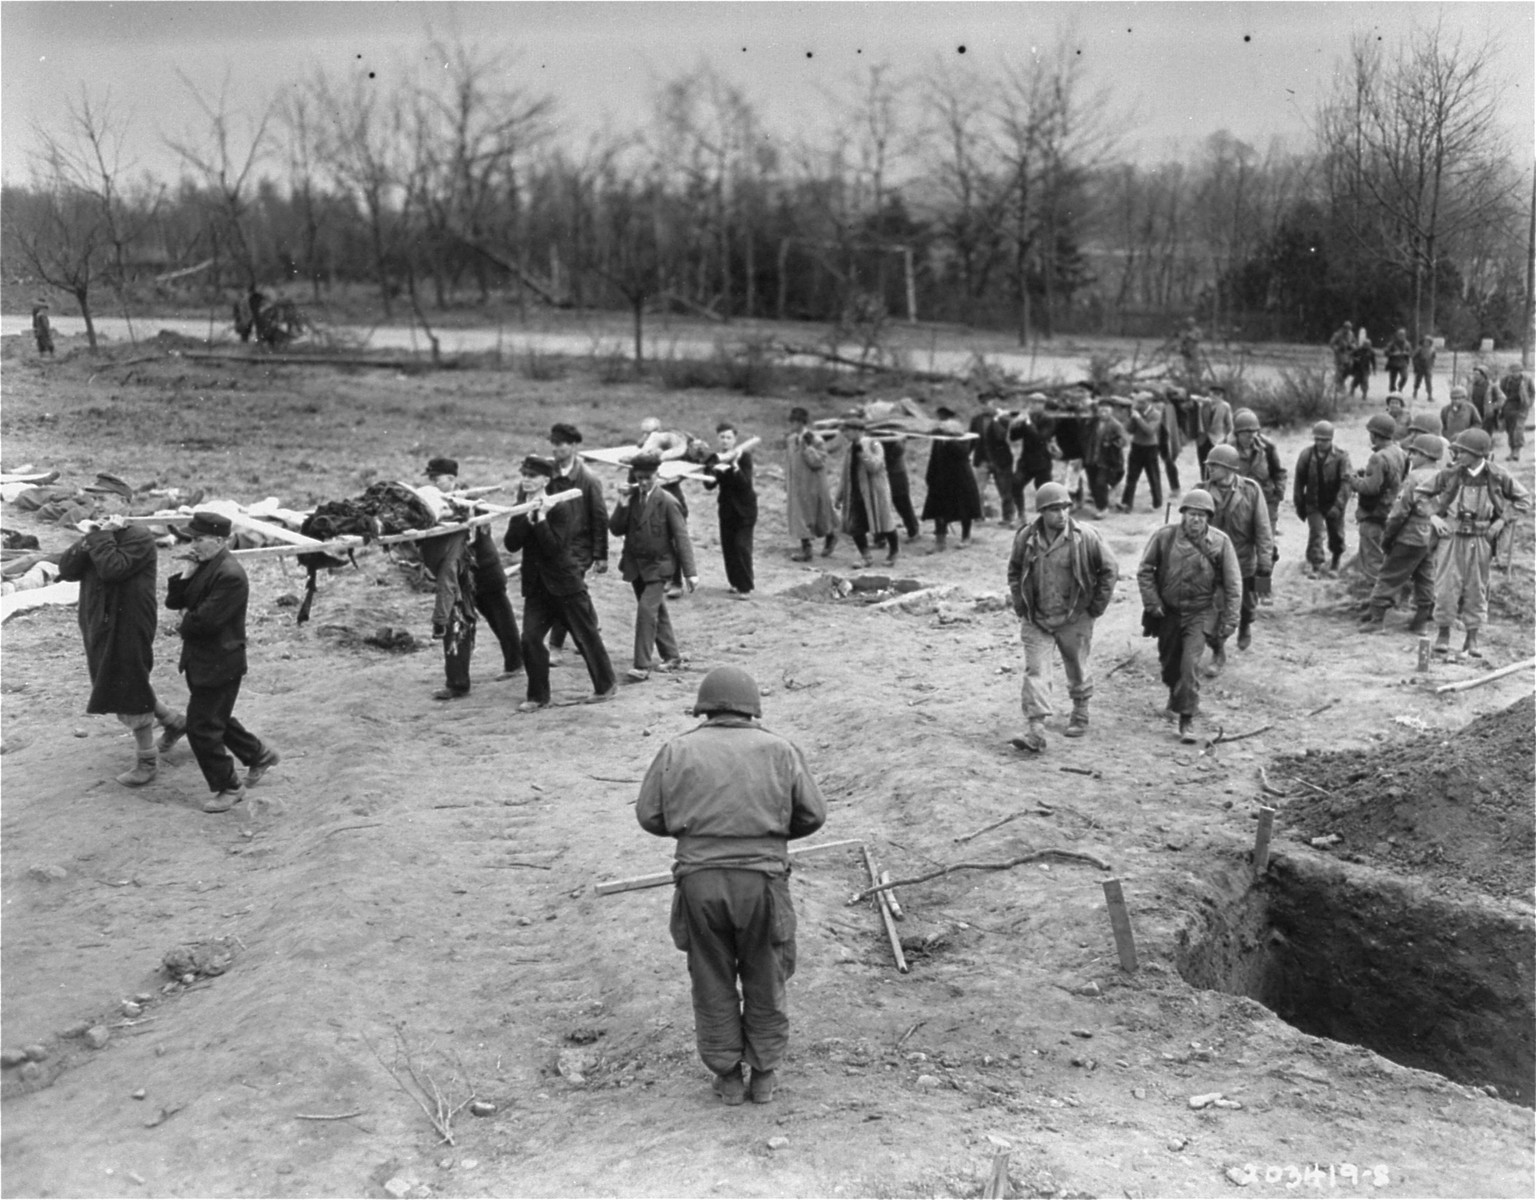 German civilians from the town of Nordhausen carry the bodies of prisoners from the Nordhausen concentration camp to mass graves.